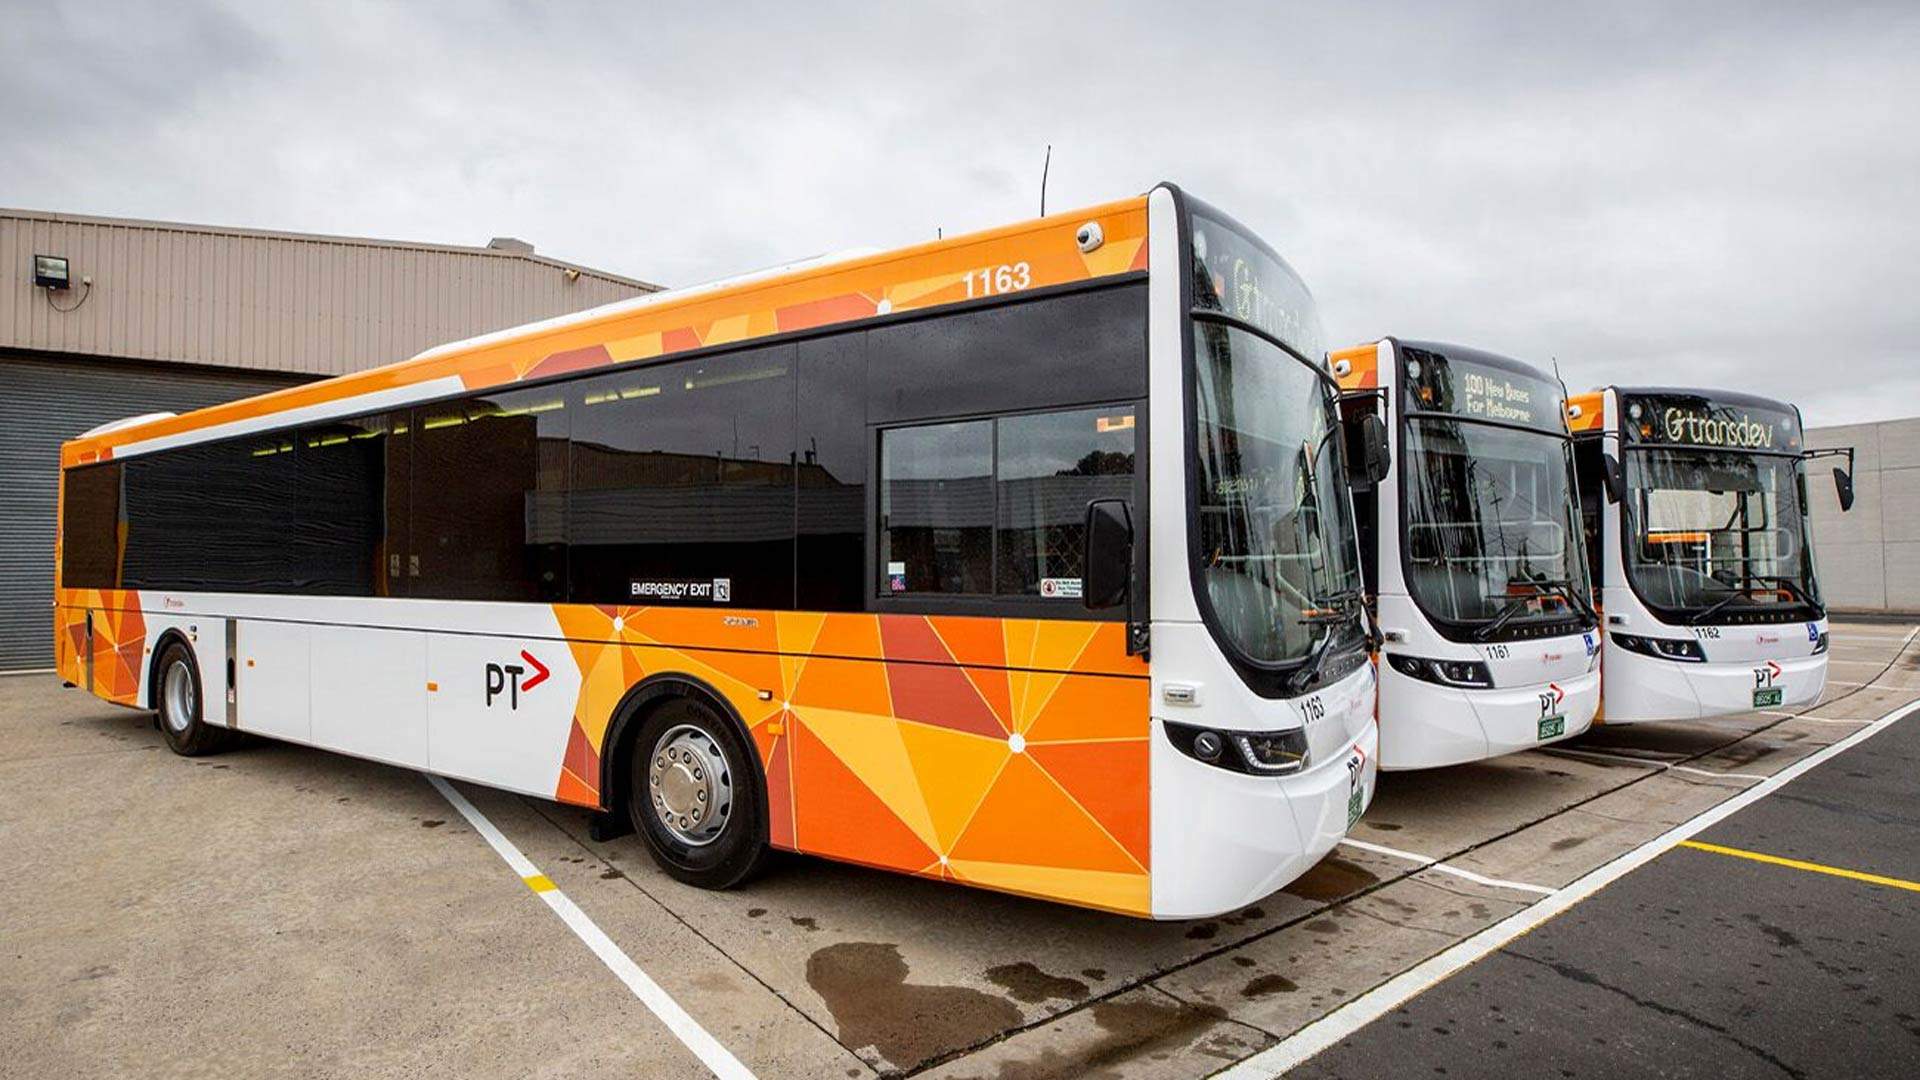 New Buses with On-Board USB Charging Stations Are Now Rolling Around Melbourne